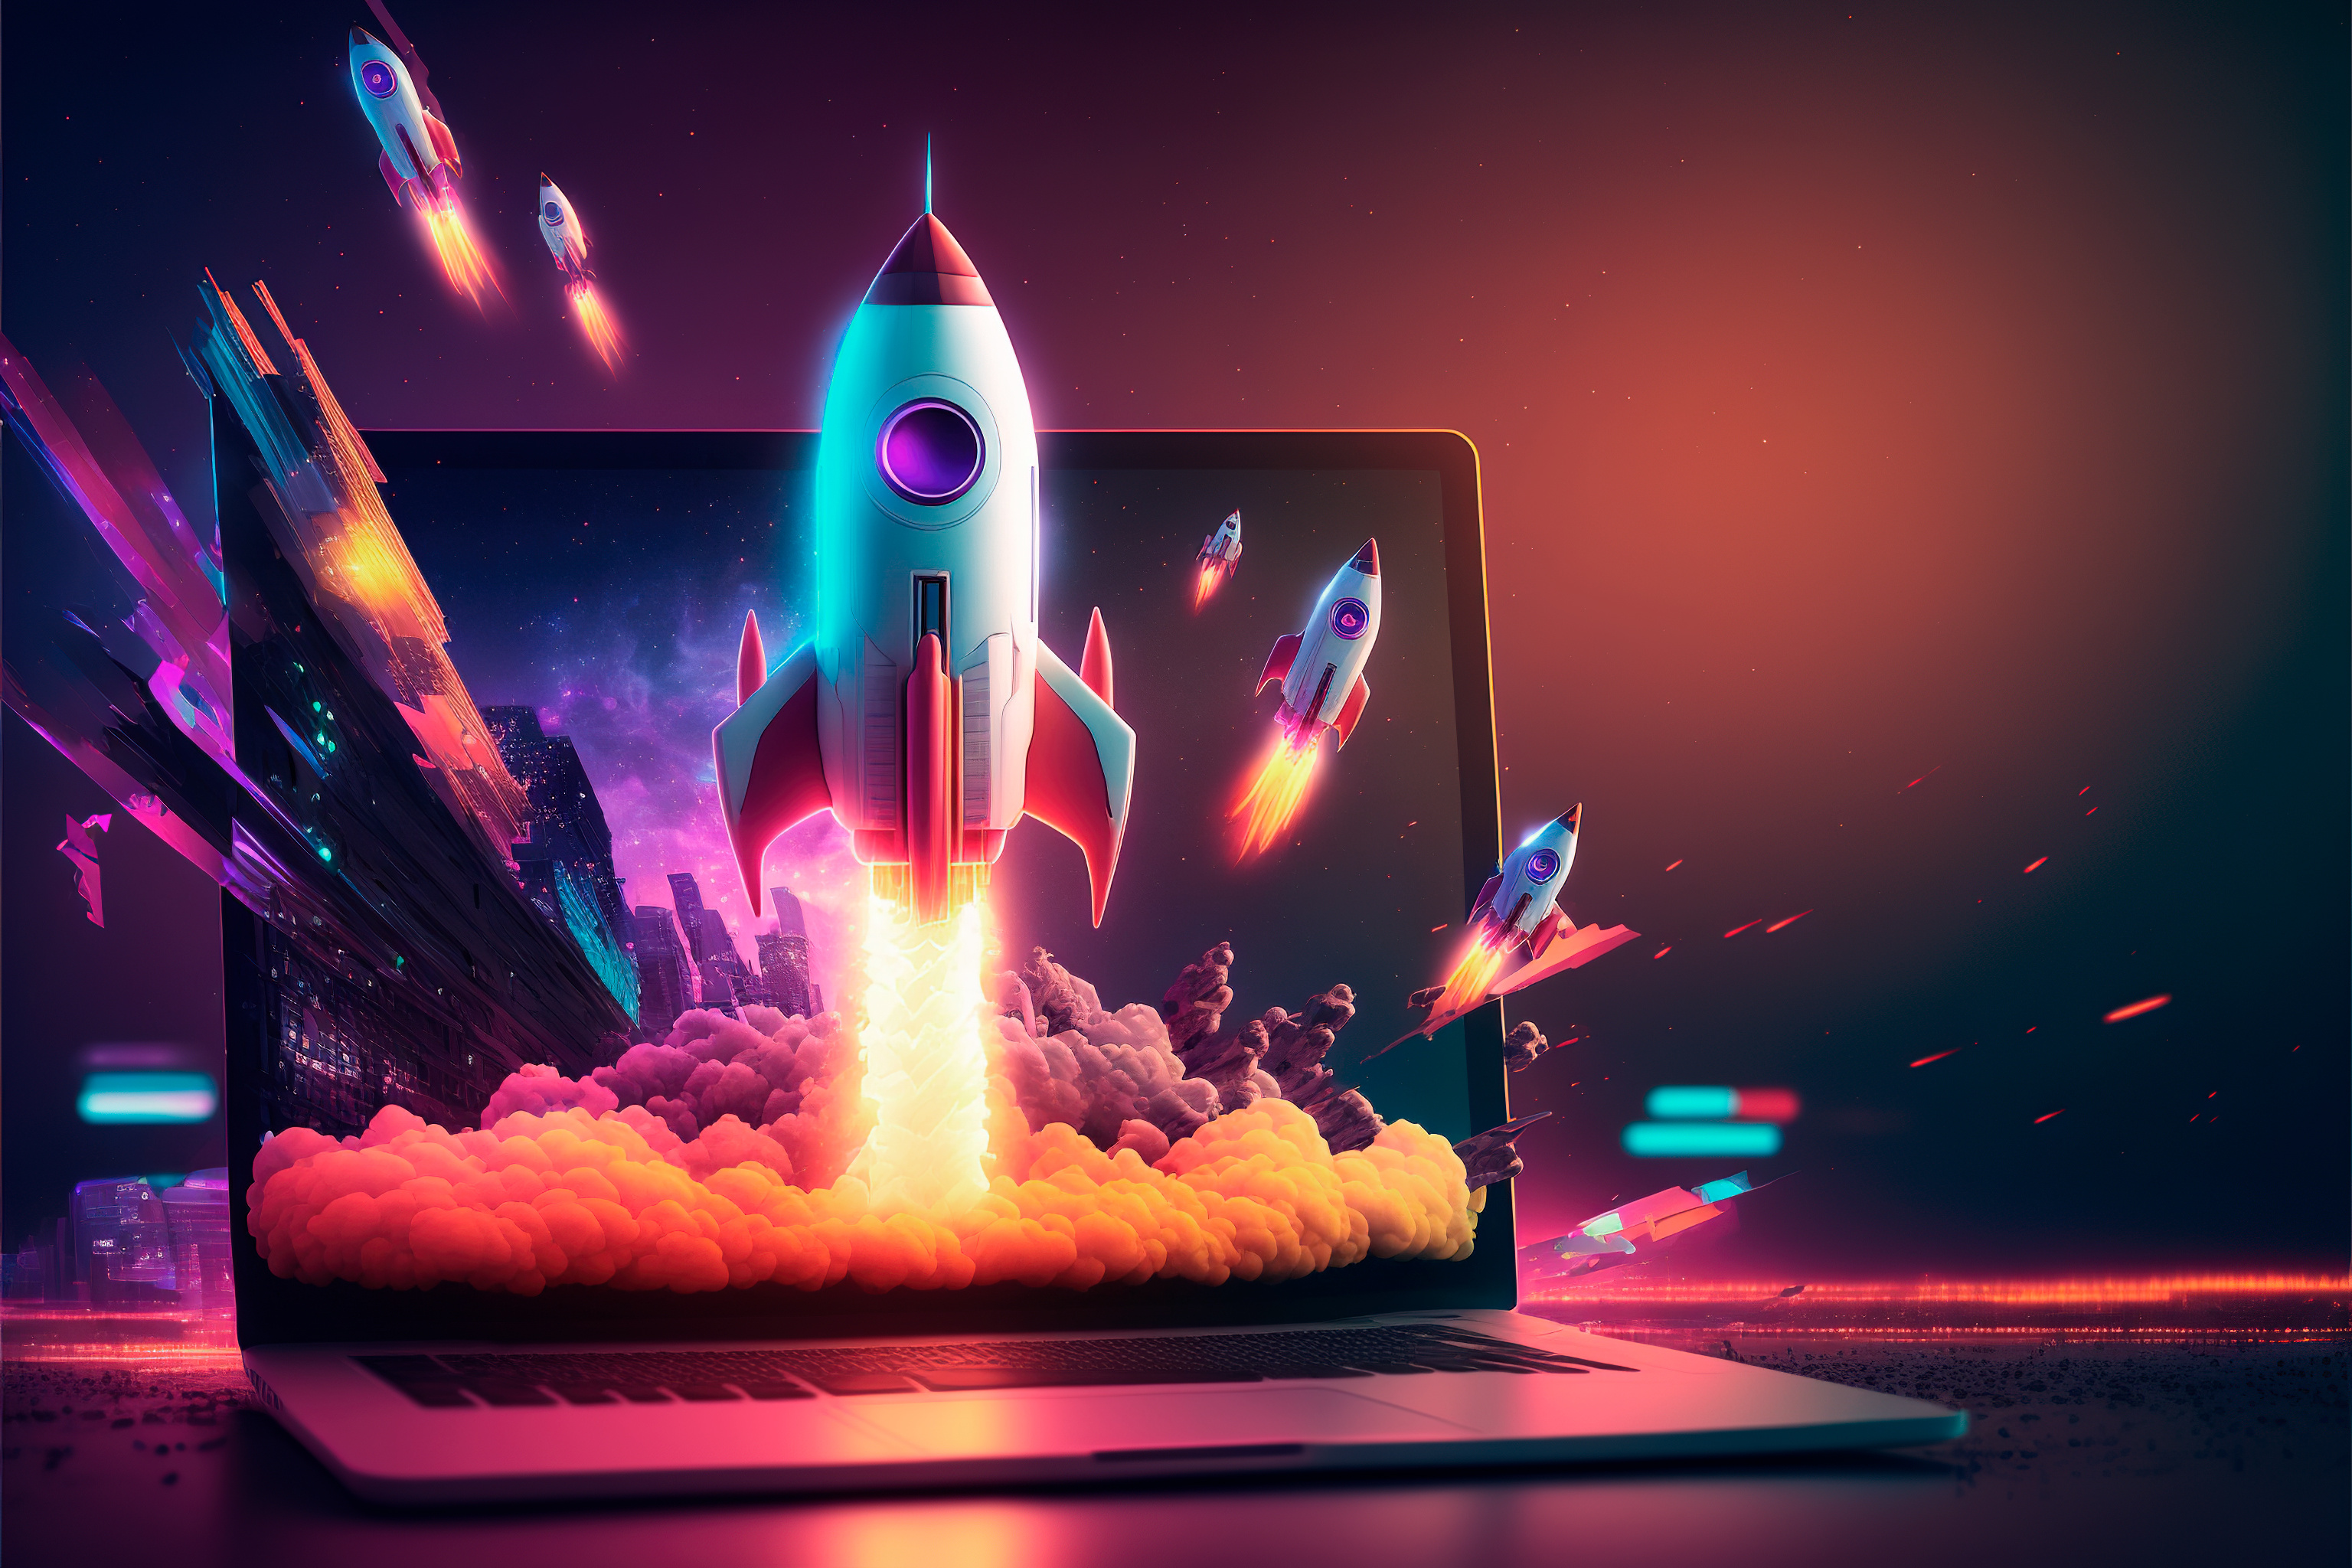 Image of a rocket launching, similar to cryptocurrency investments launch in price.